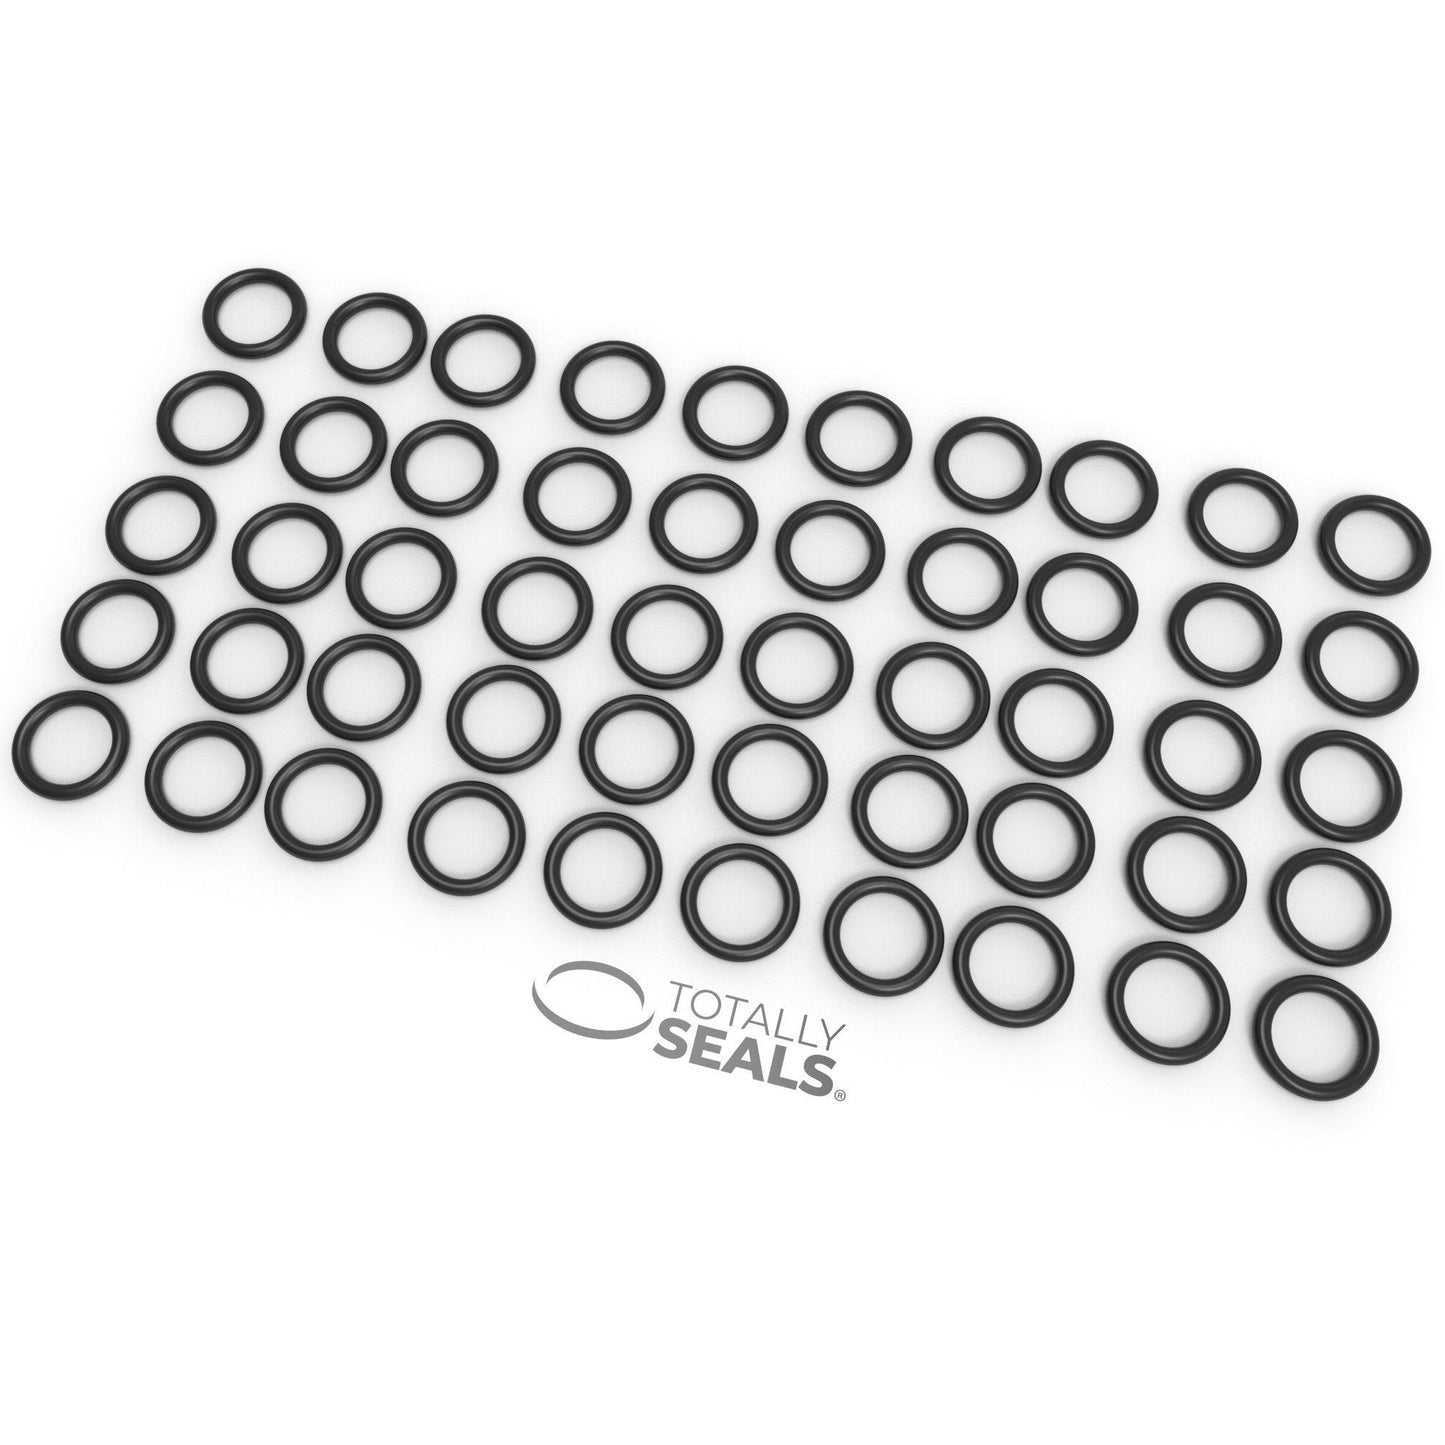 21mm x 1.5mm (24mm OD) Nitrile O-Rings - Totally Seals®